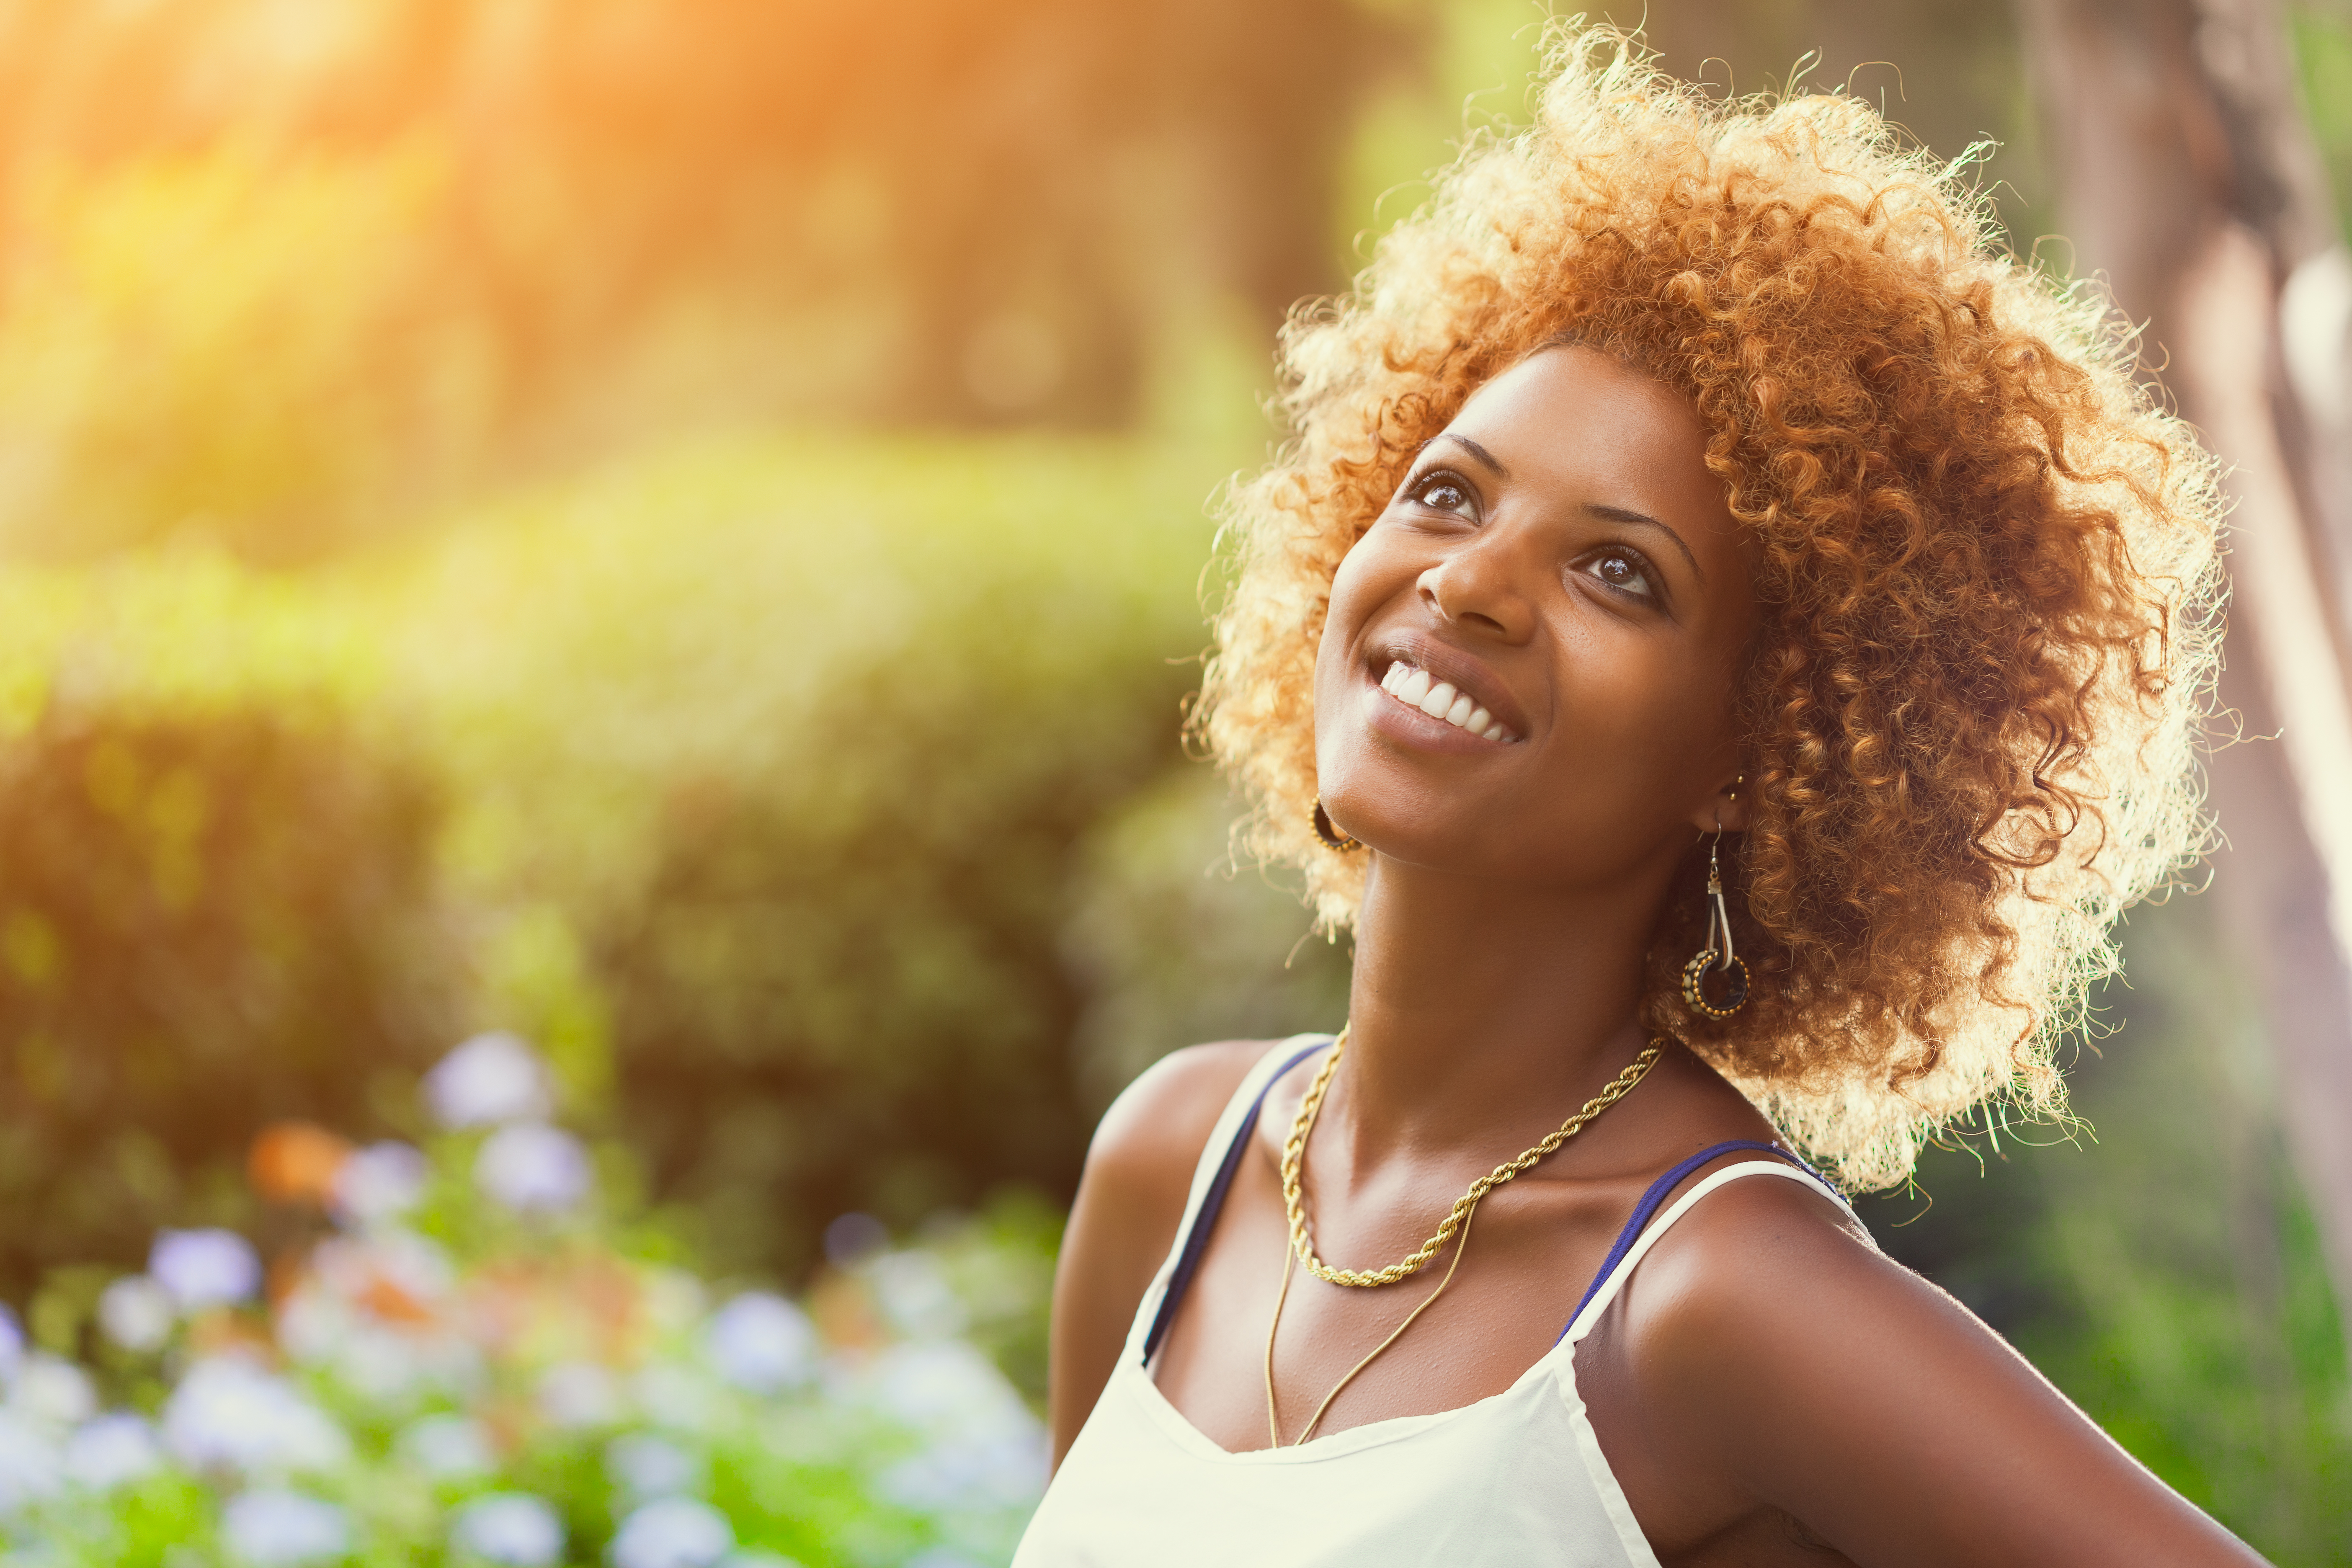 Smiling African woman in sunshine Outdoors profile portrait